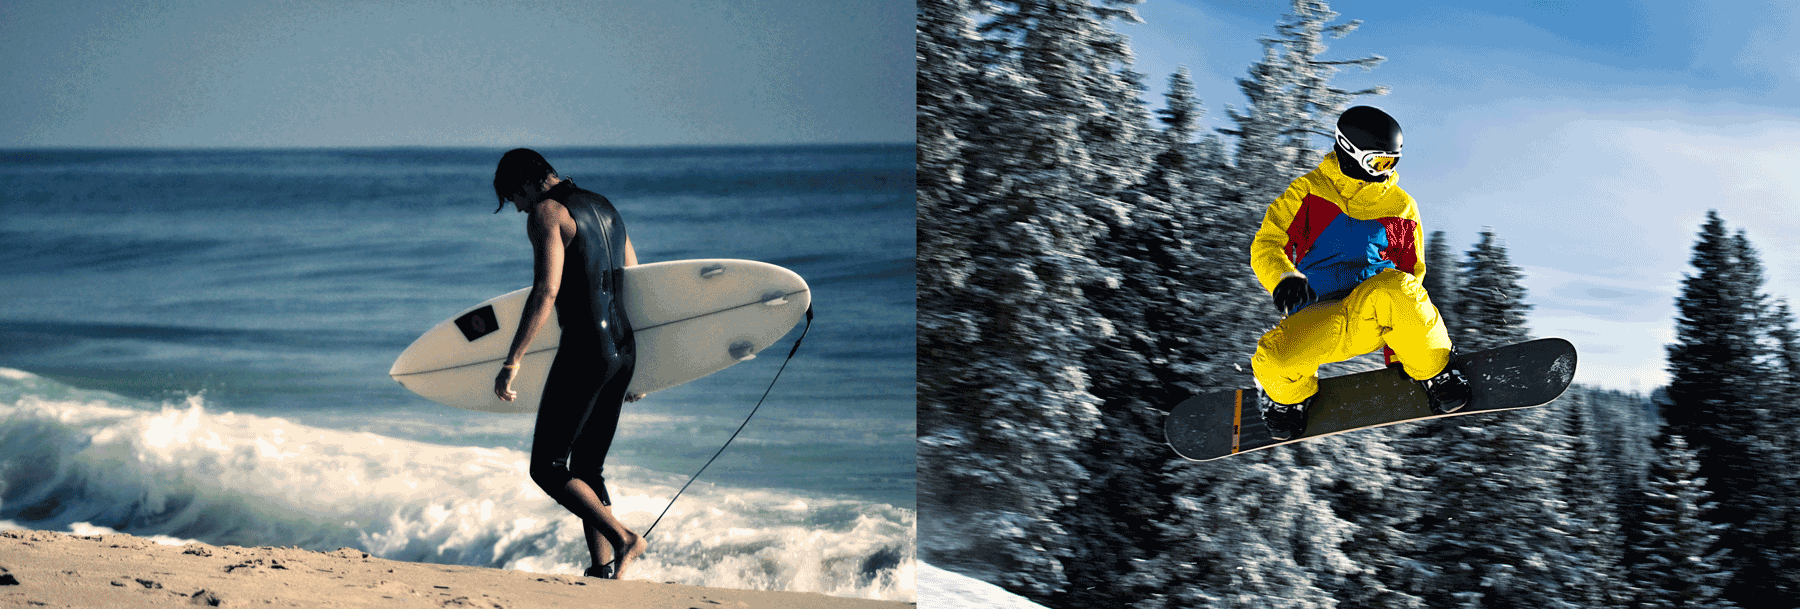 surfers and snowboarders